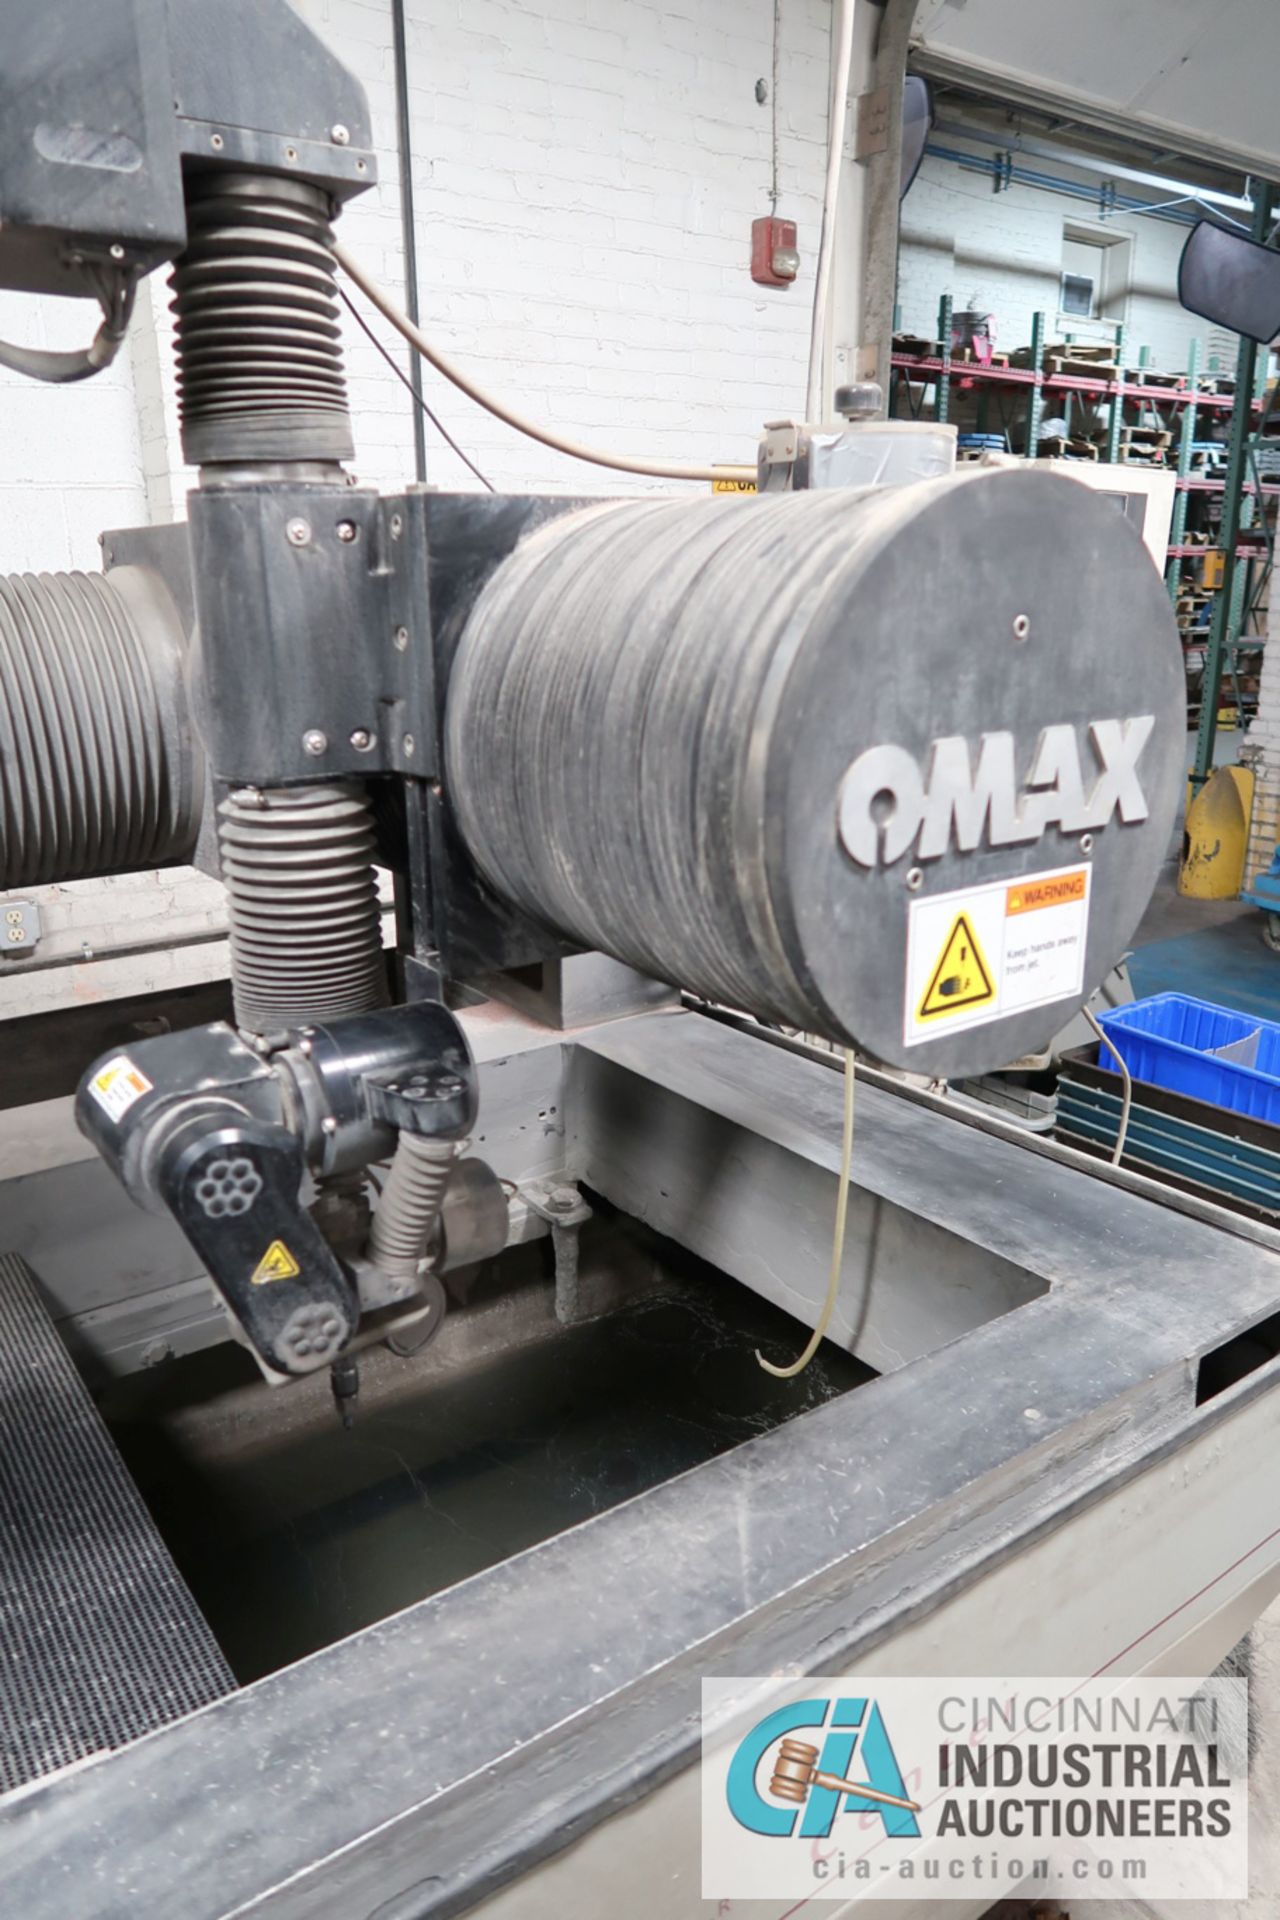 60,000 PSI OMAX MODEL 2626 JET MACHINING CENTER WATER JET CUTTING MACHINE; S/N D51167OR, 31" X 46" - Image 4 of 9